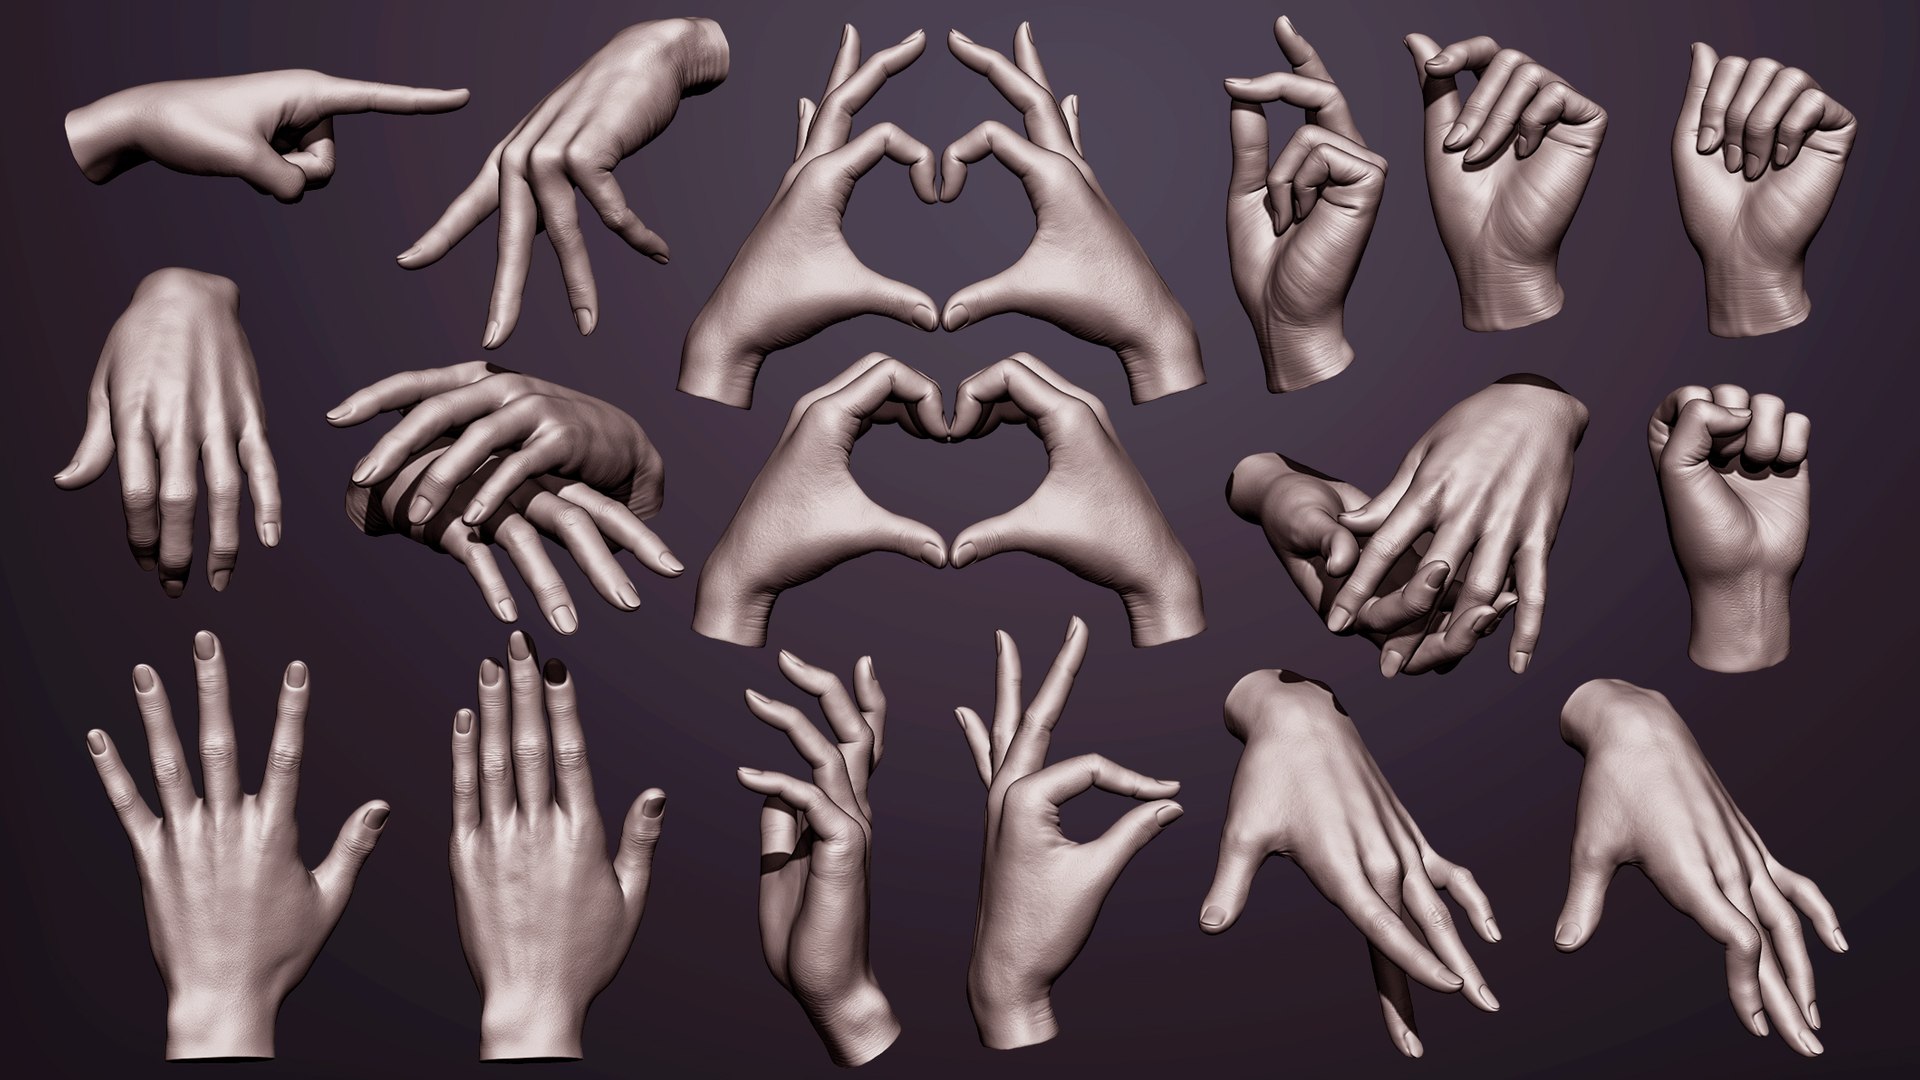 Hand Gestures with sketch and 3D models by Nadia - Make better art